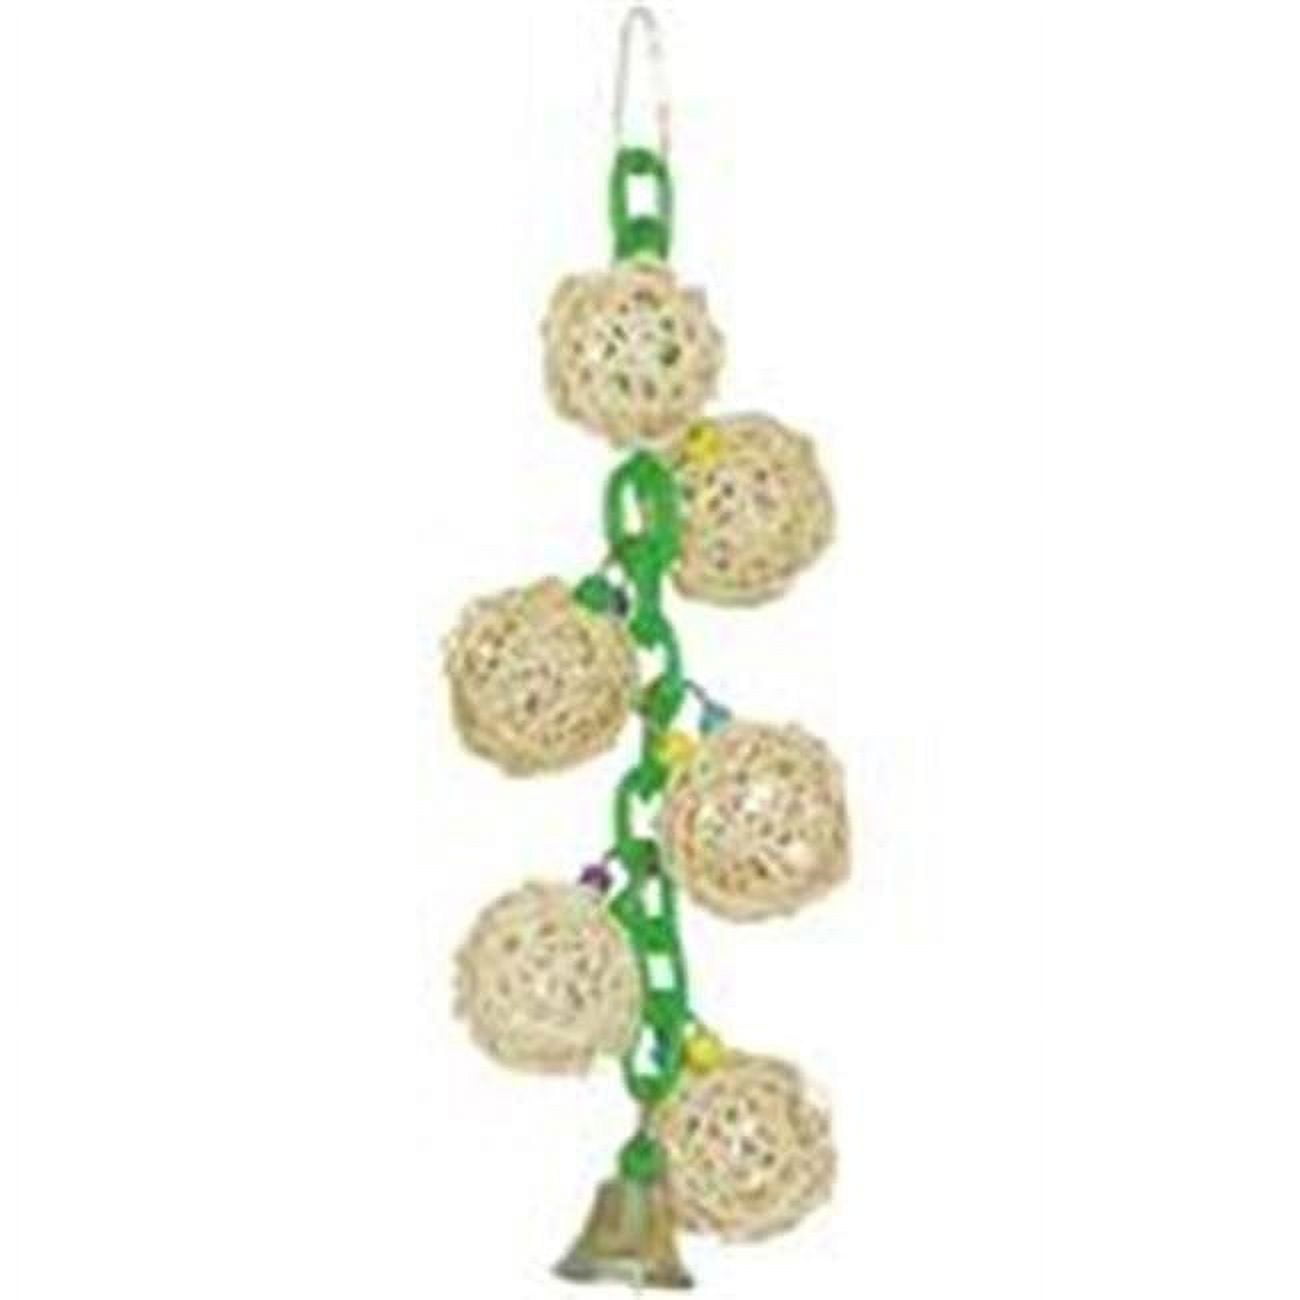 Six Vine Balls On Chain With Bell